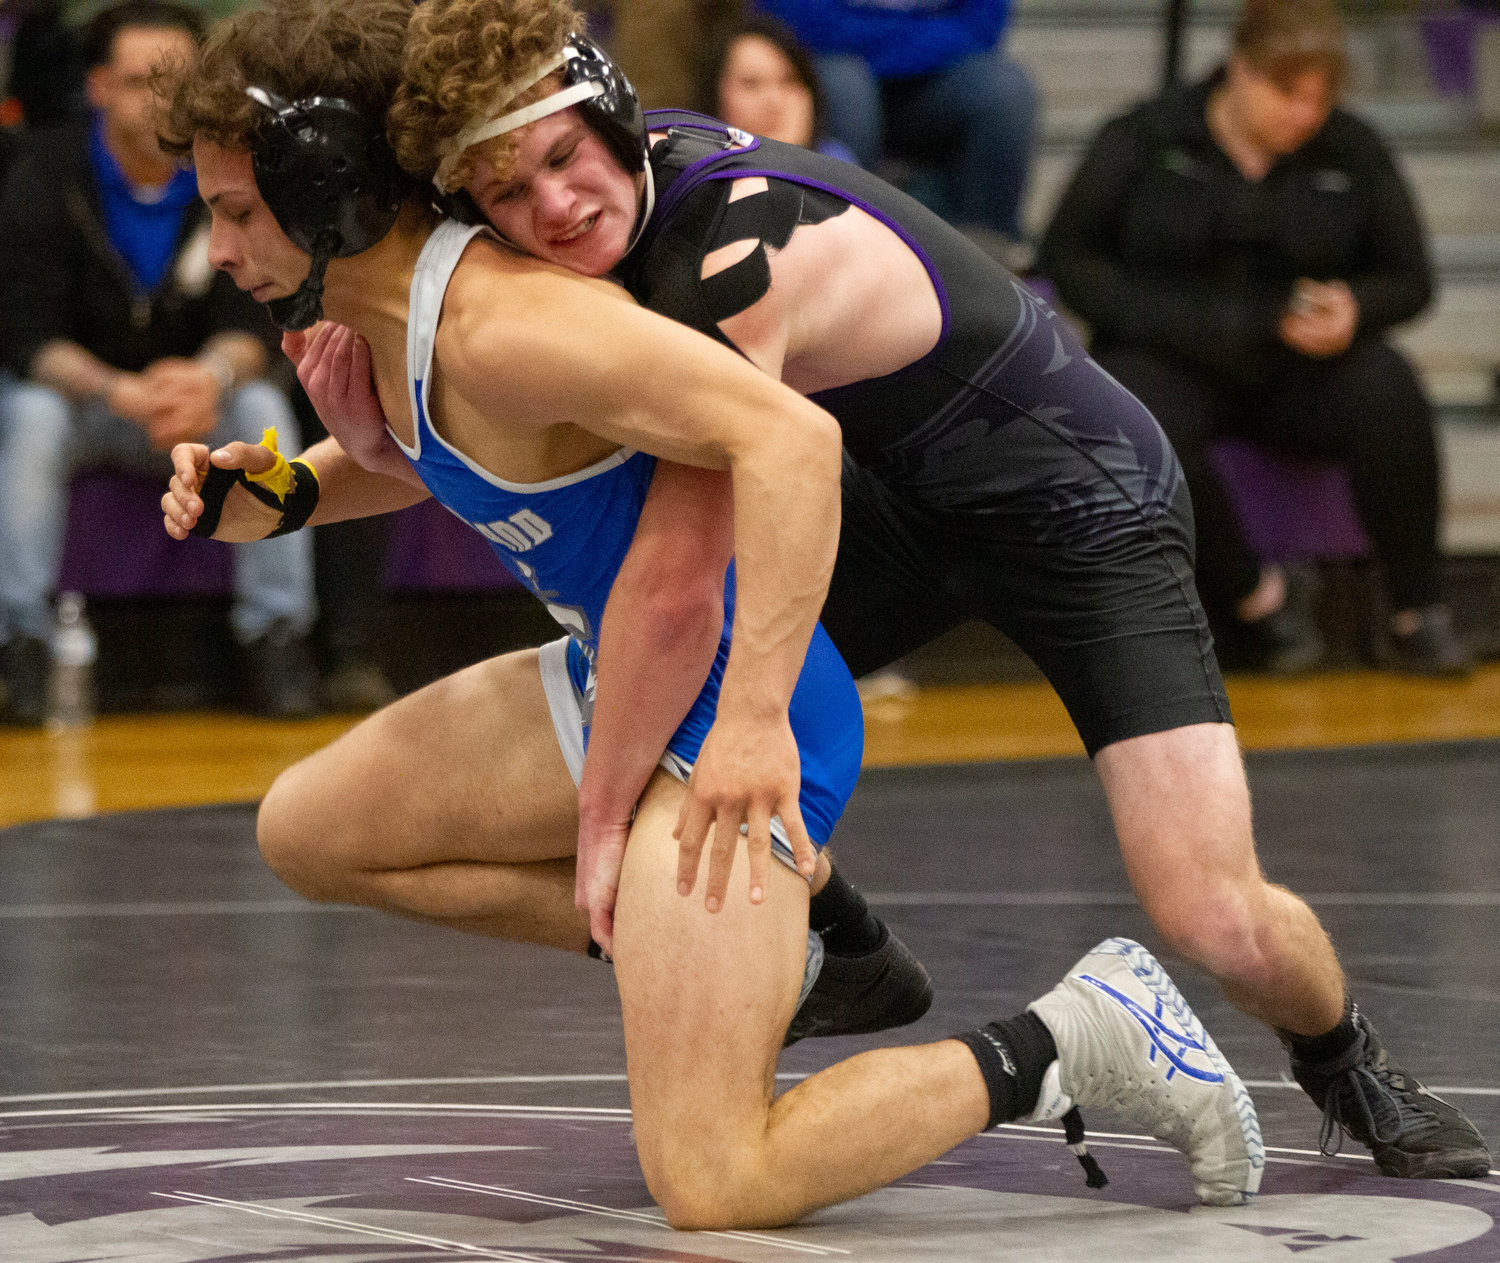 James Thibaudeau, a 152 pound junior, lost a close decision to Cumberland’s Jordan DaCosta in his first match back from a shoulder injury, that has hampered him this season.